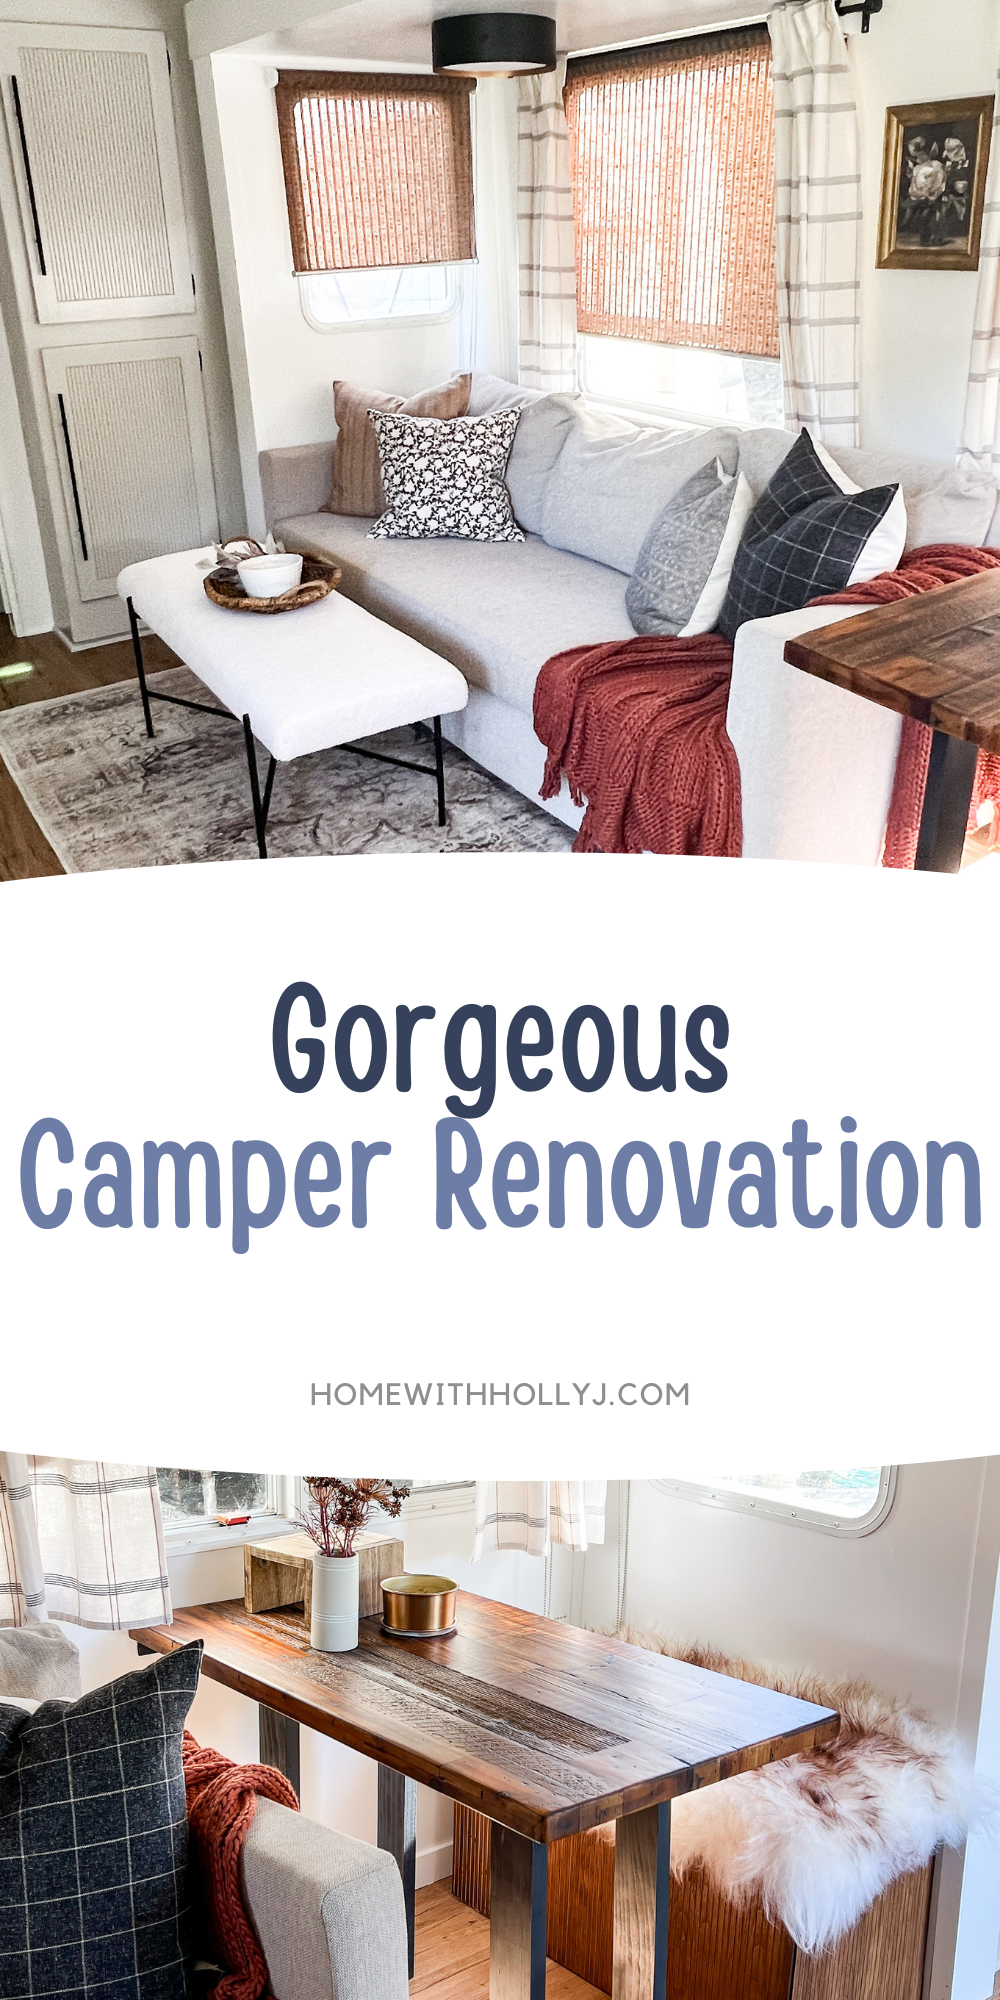 What to do for your anniversary when your spouse has everything? Check out this camper renovation for the ultimate 30th anniversary gift.